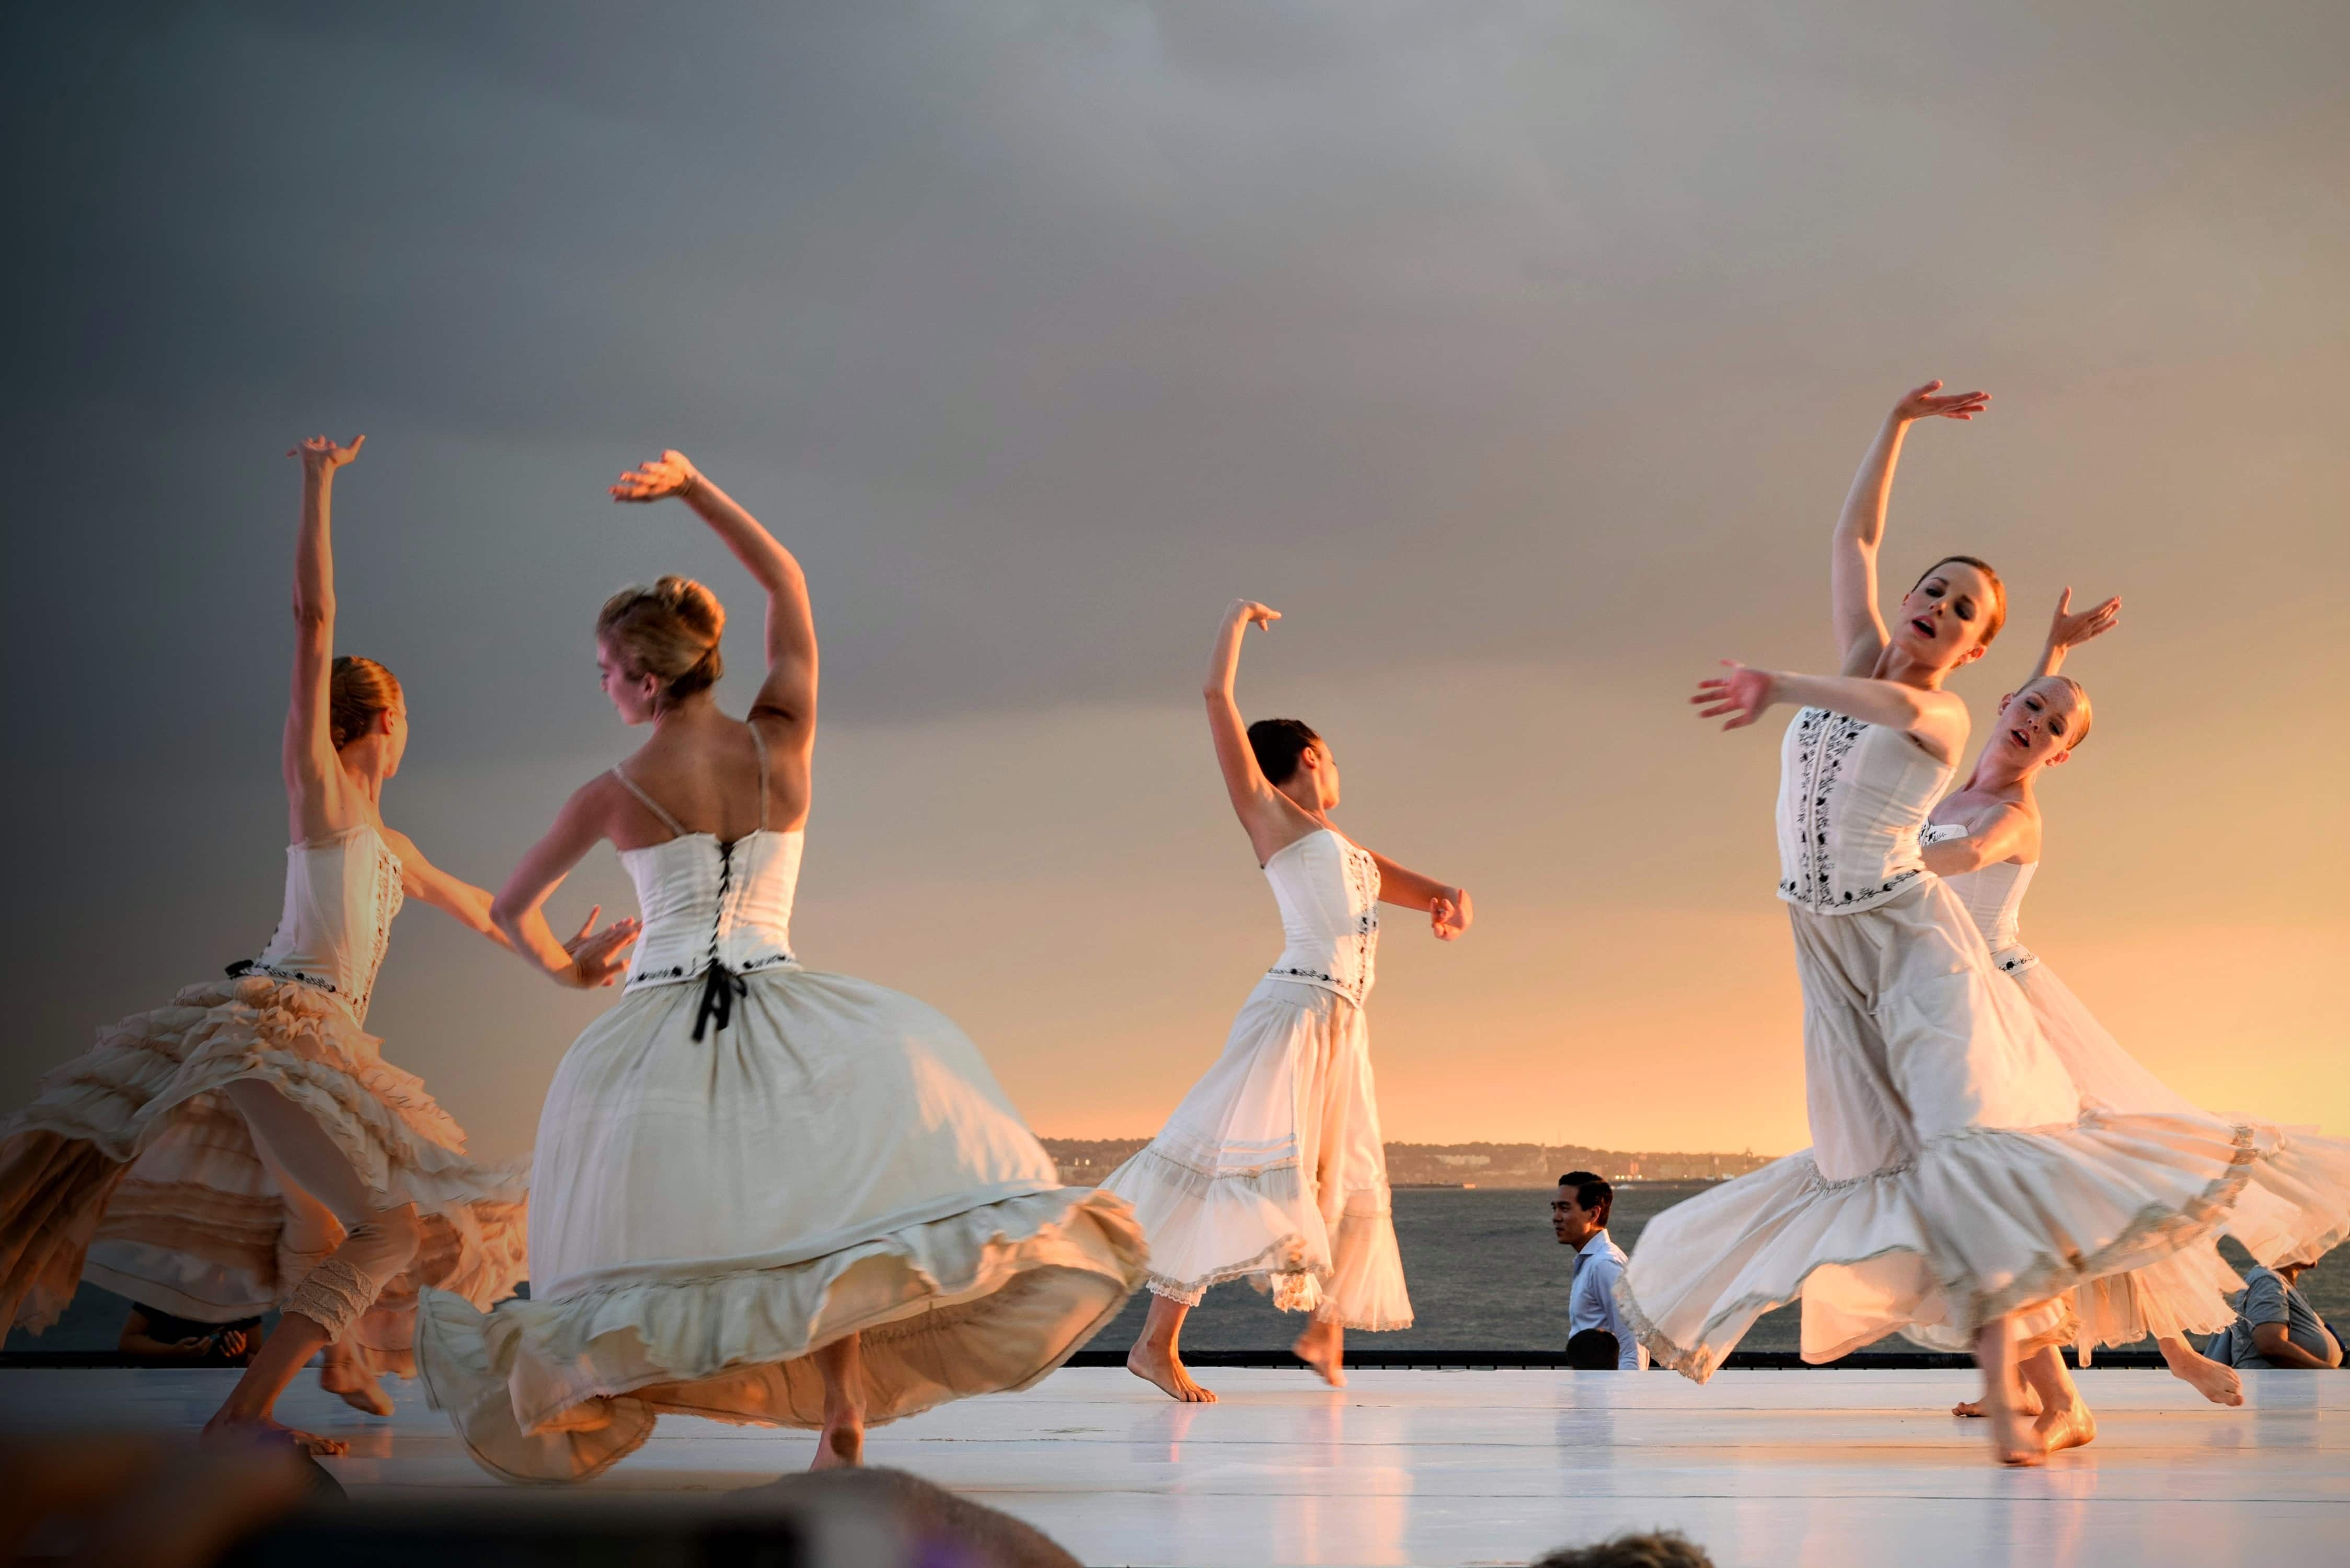 Dancers dressed in white on stage, with the sea in the background.